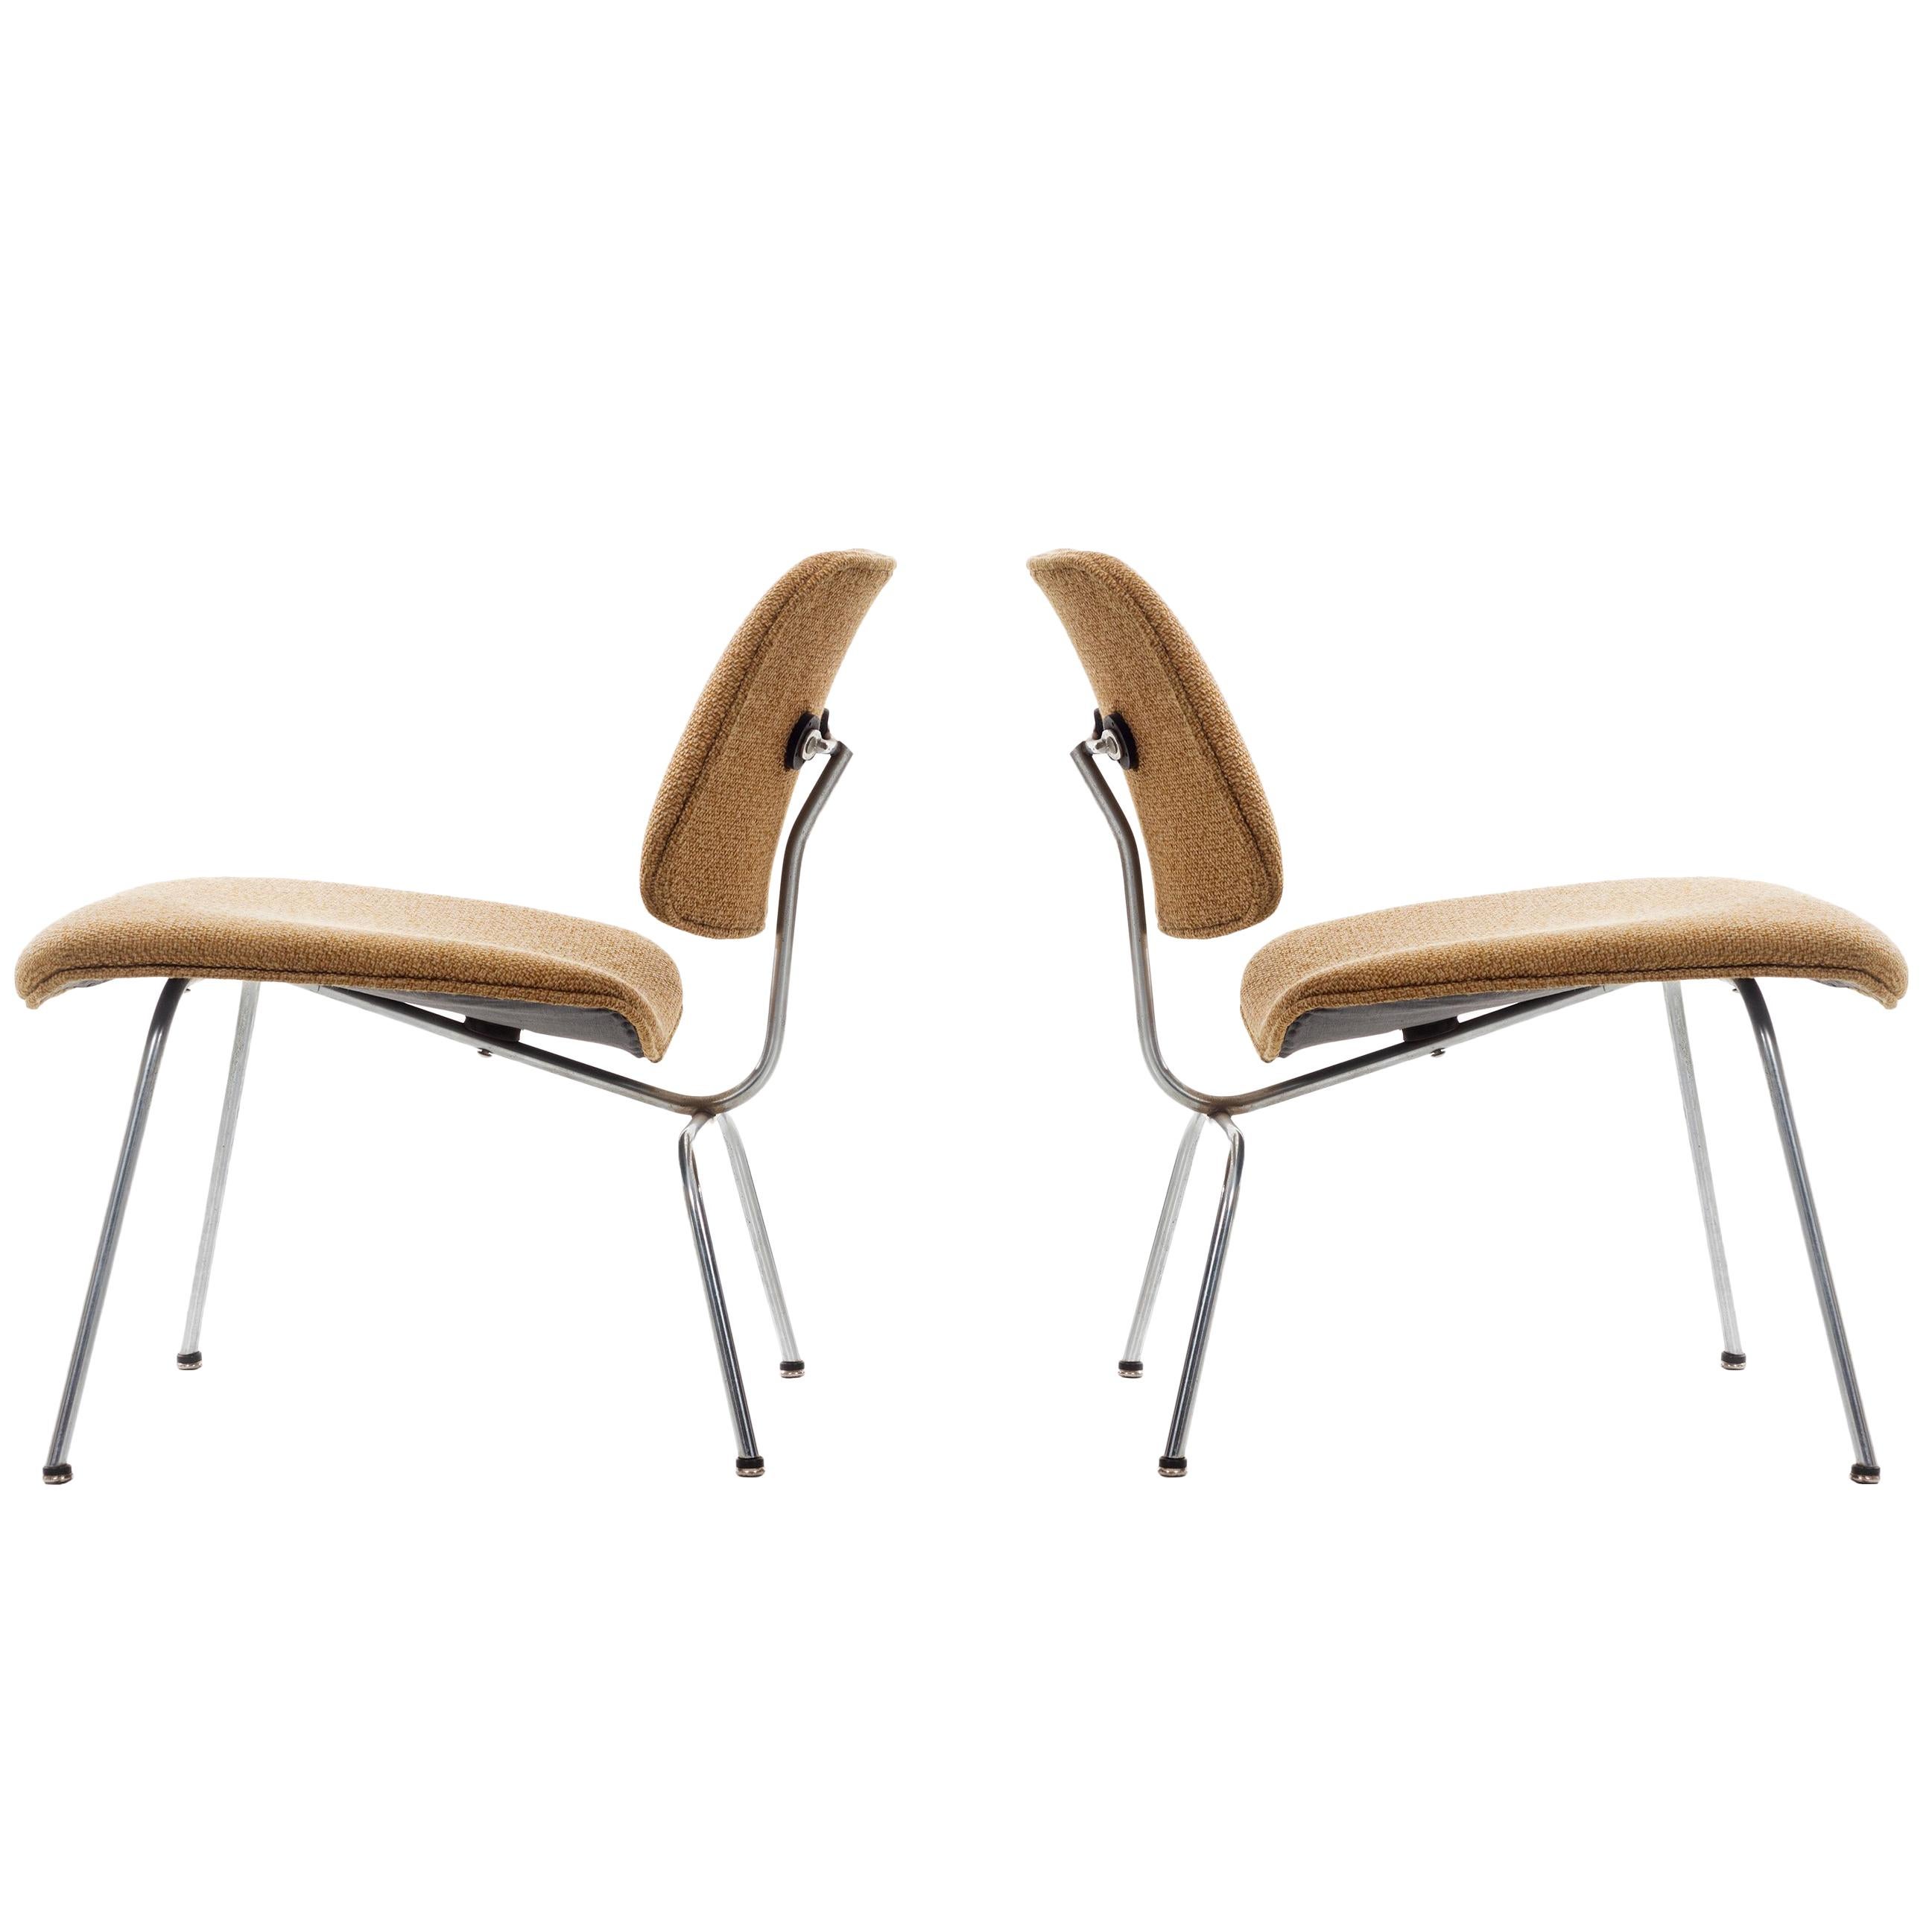 Charles Ray Eames Chairs